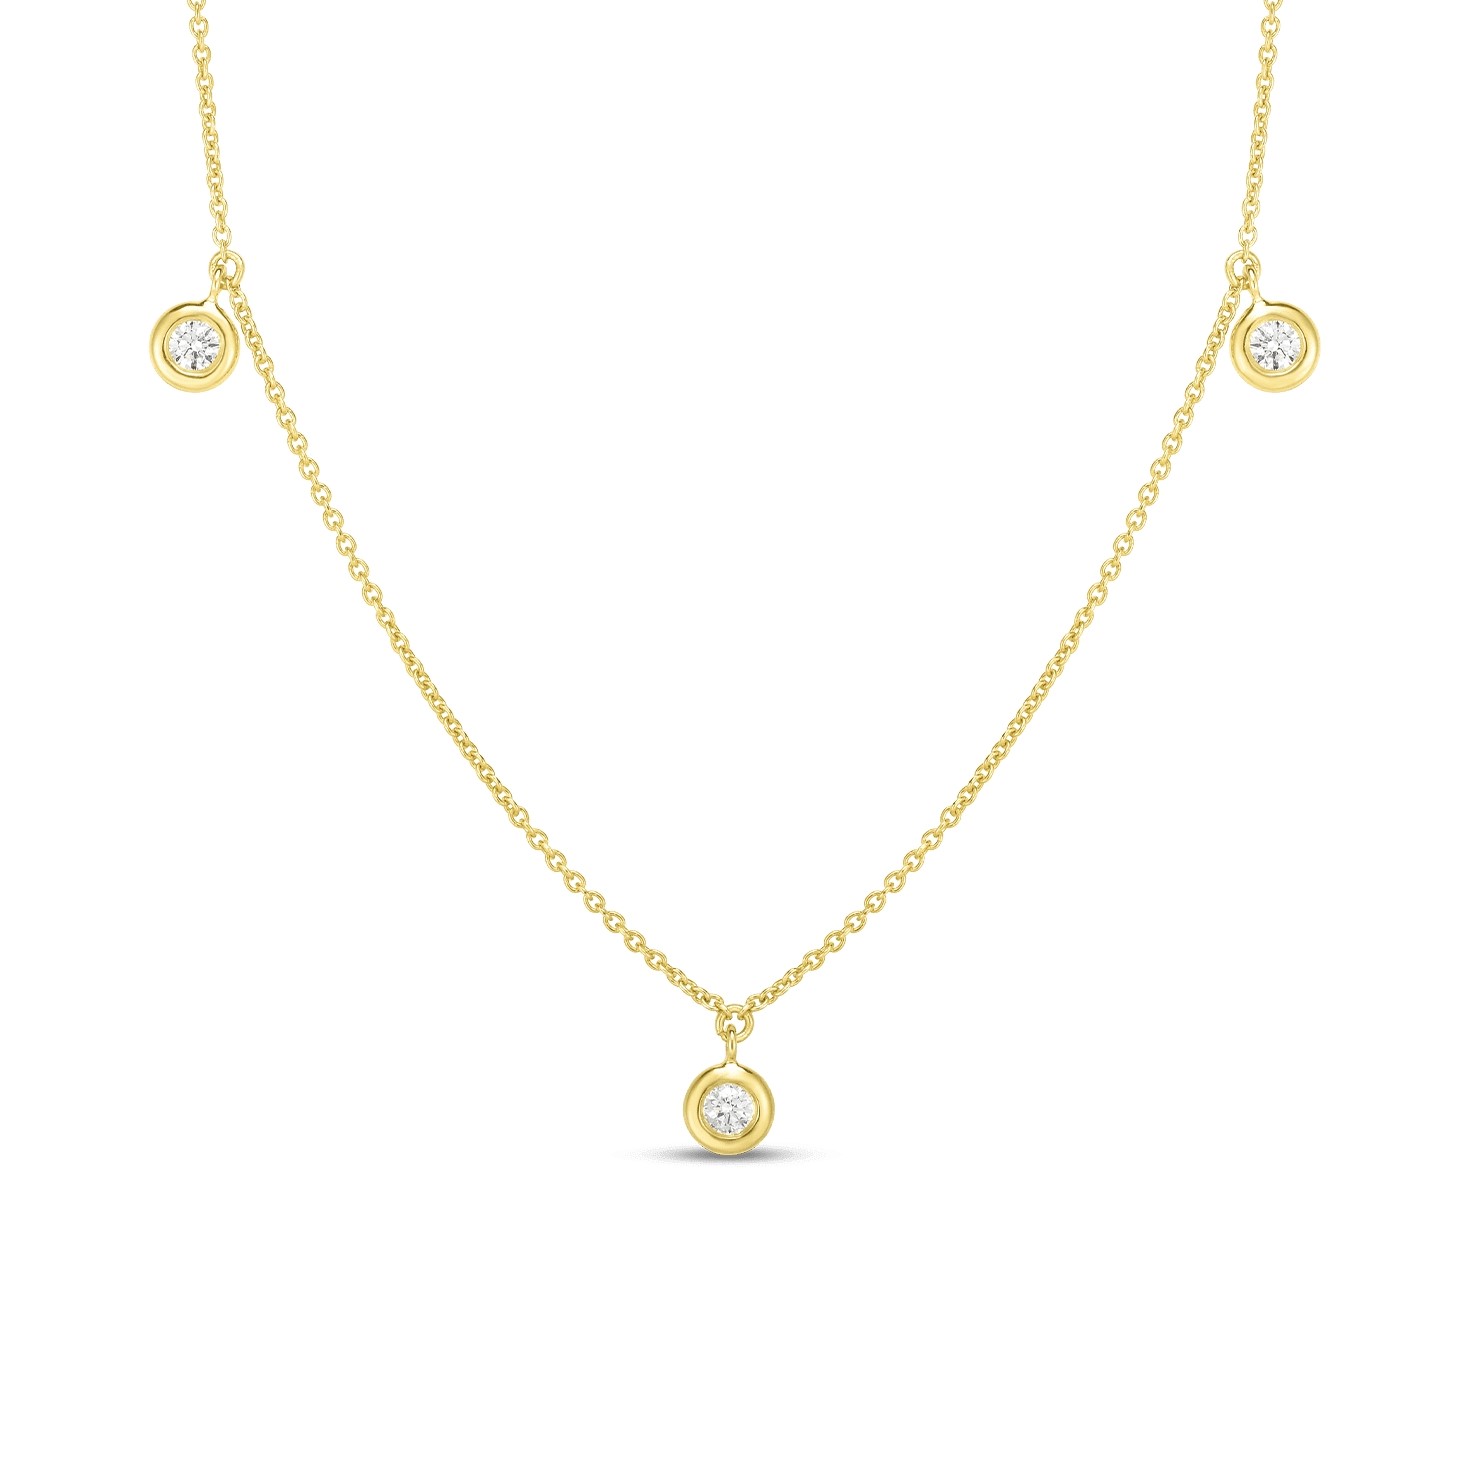 Roberto Coin 18K Yellow Gold 3 Stations Dangling Necklace with 3 Round Brilliant Cut Diamonds 0.13 TCW G-H SI